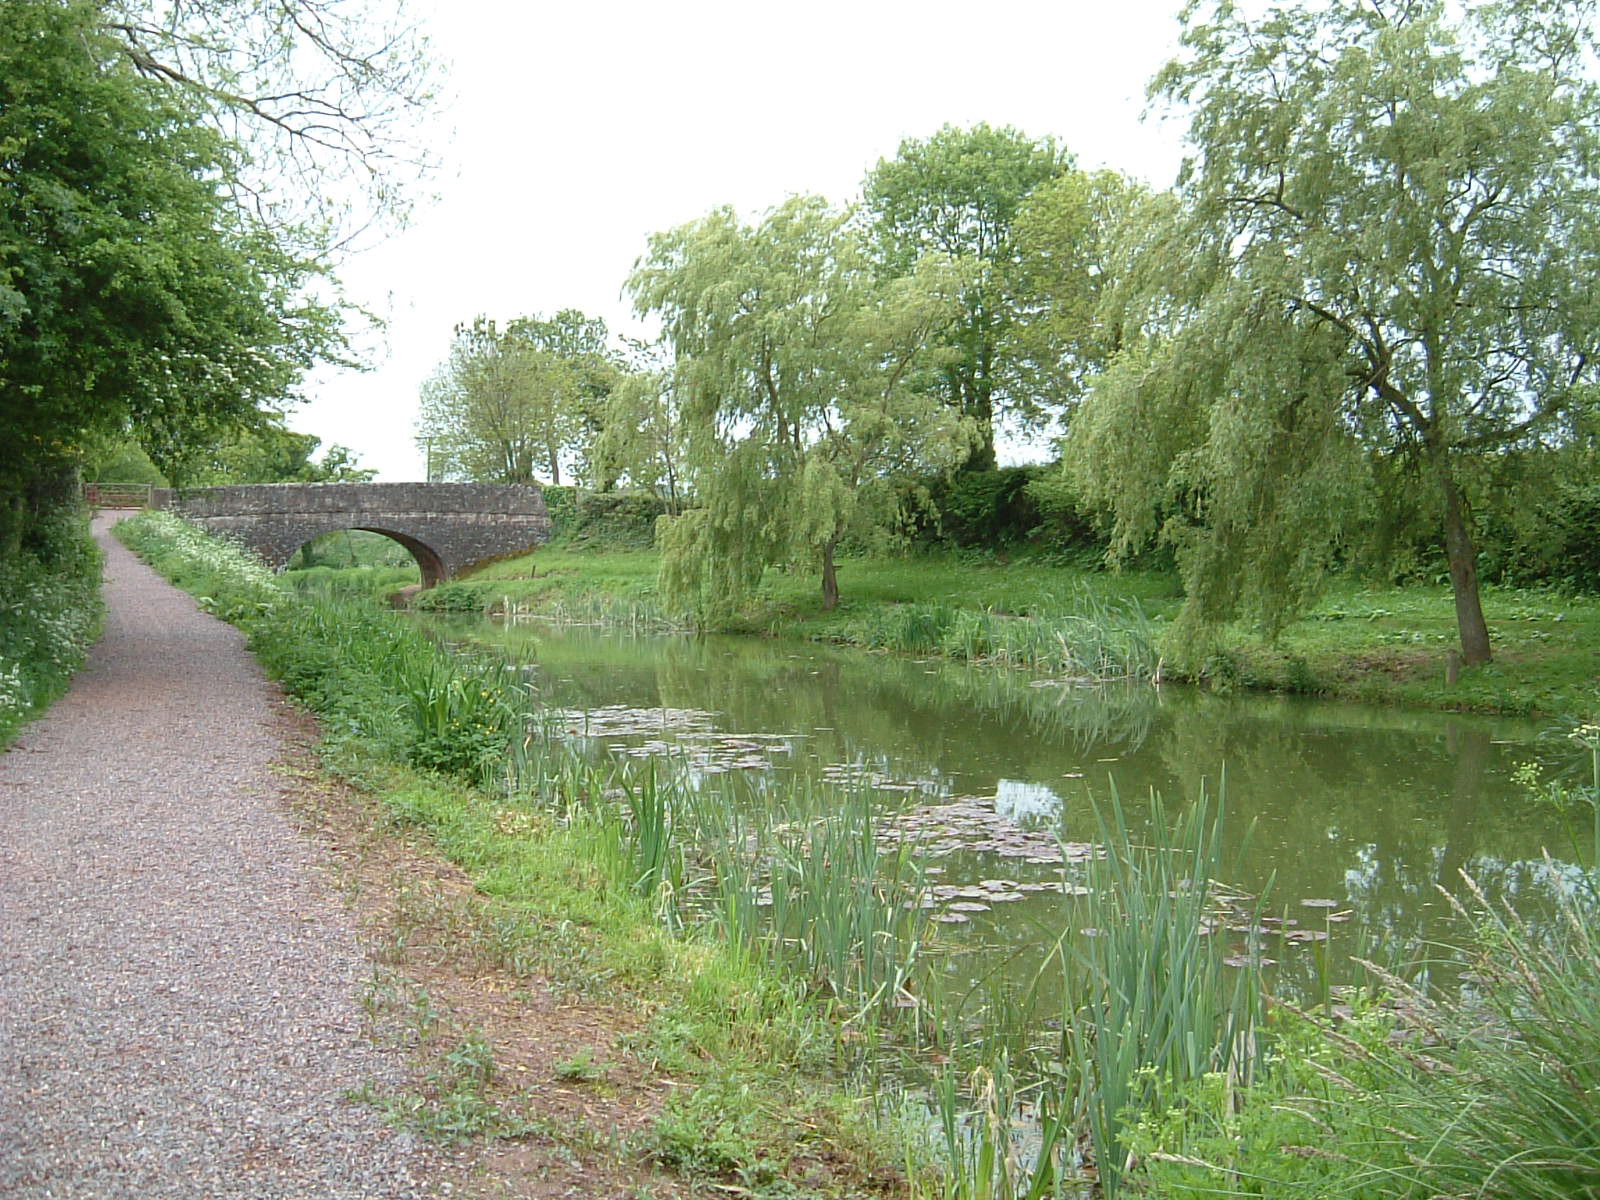 The Great Western Canal